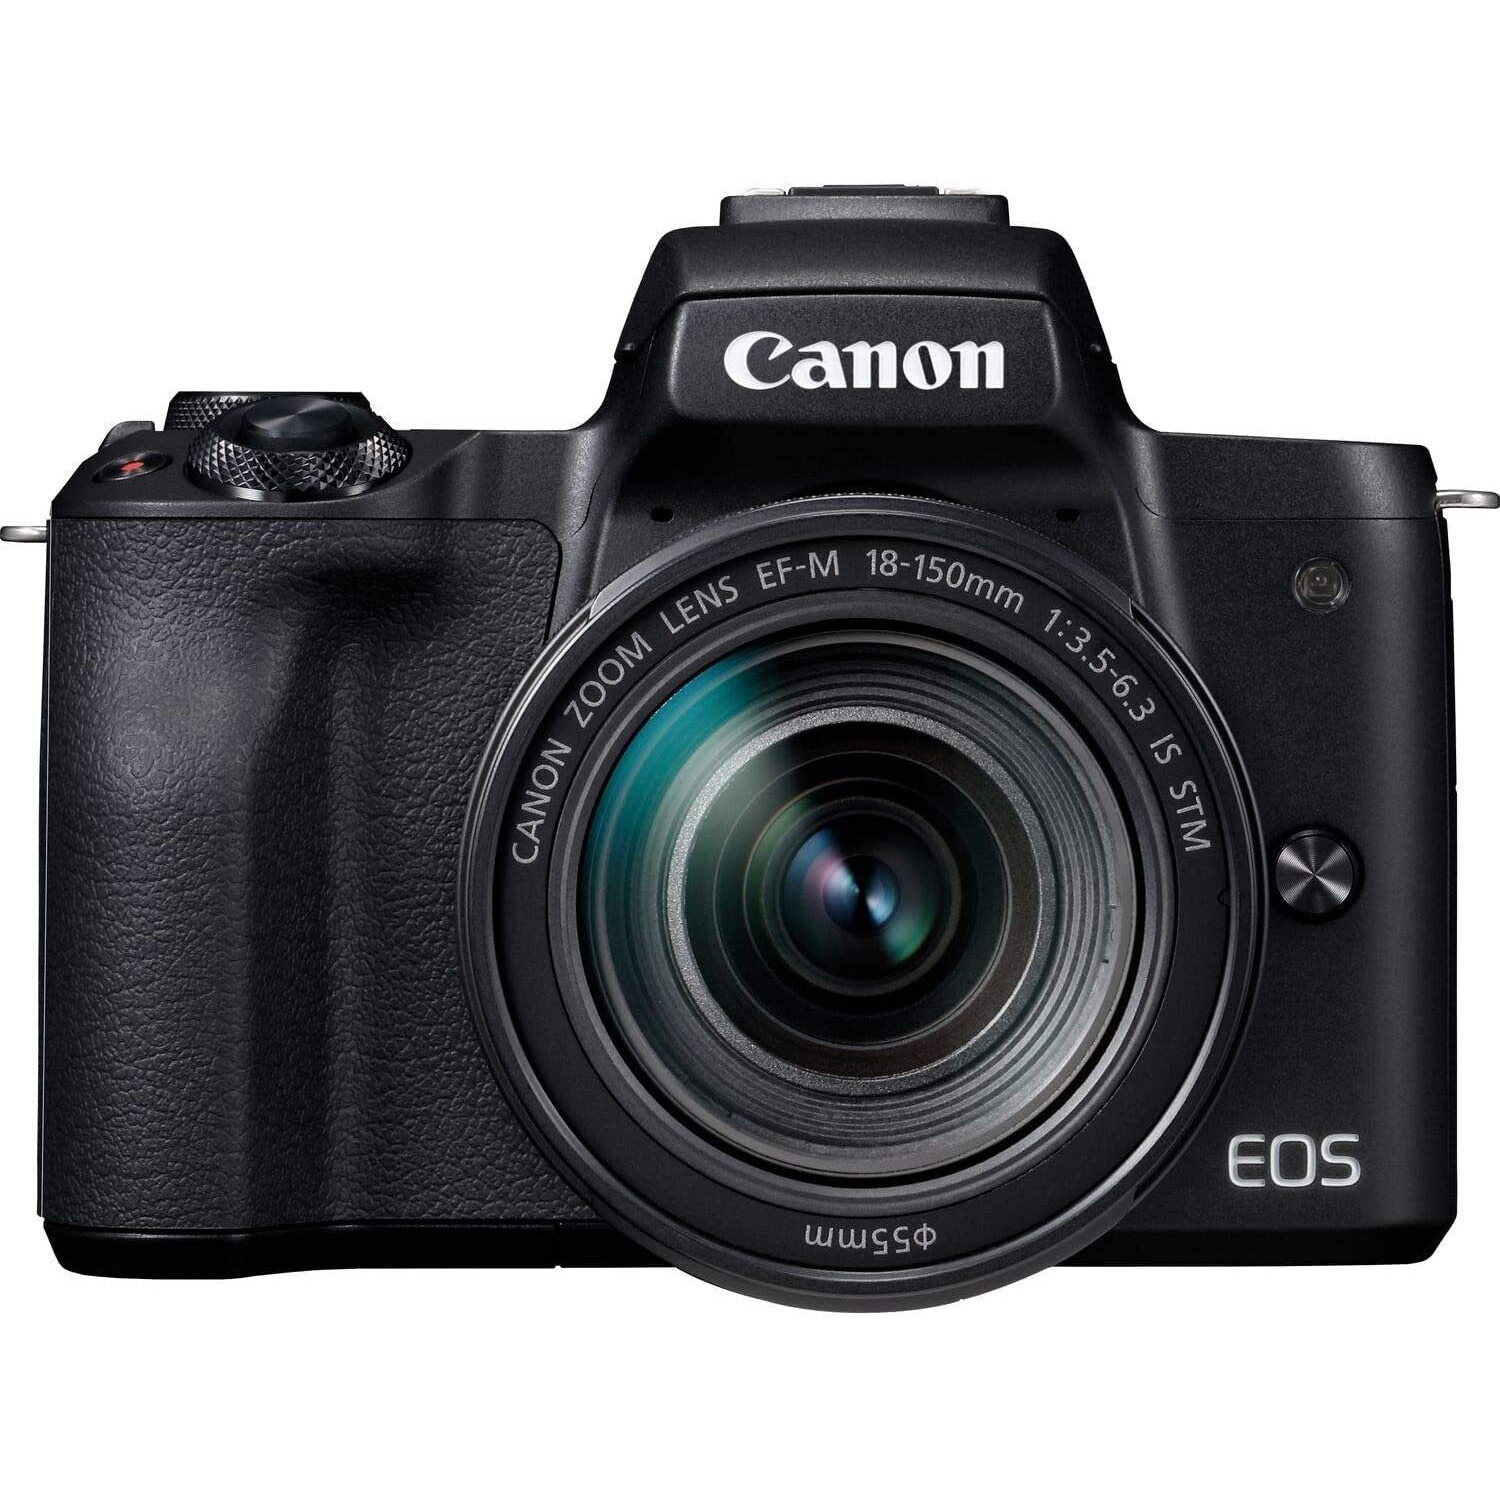 Canon EOS M50 Mark II Mirrorless Camera with EF-M 18-150mm IS STM (Black)